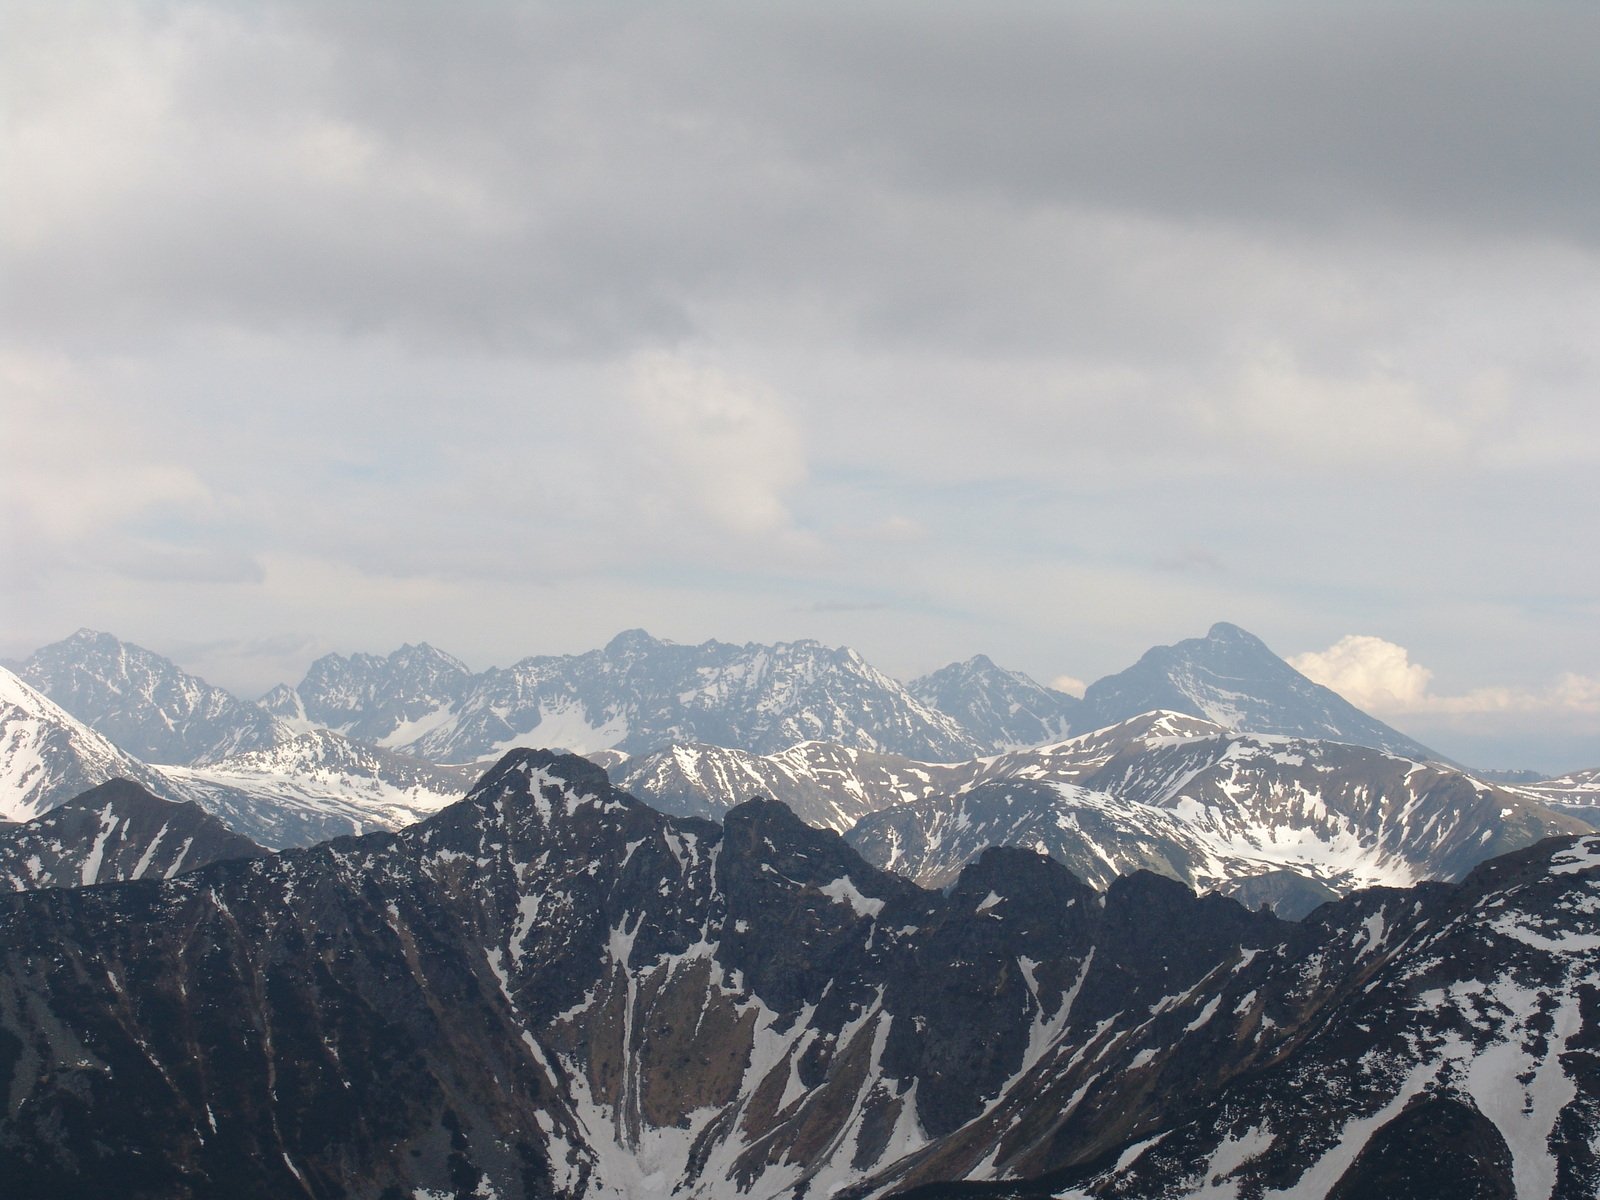 mountains are shown with snow on them in this scenic image